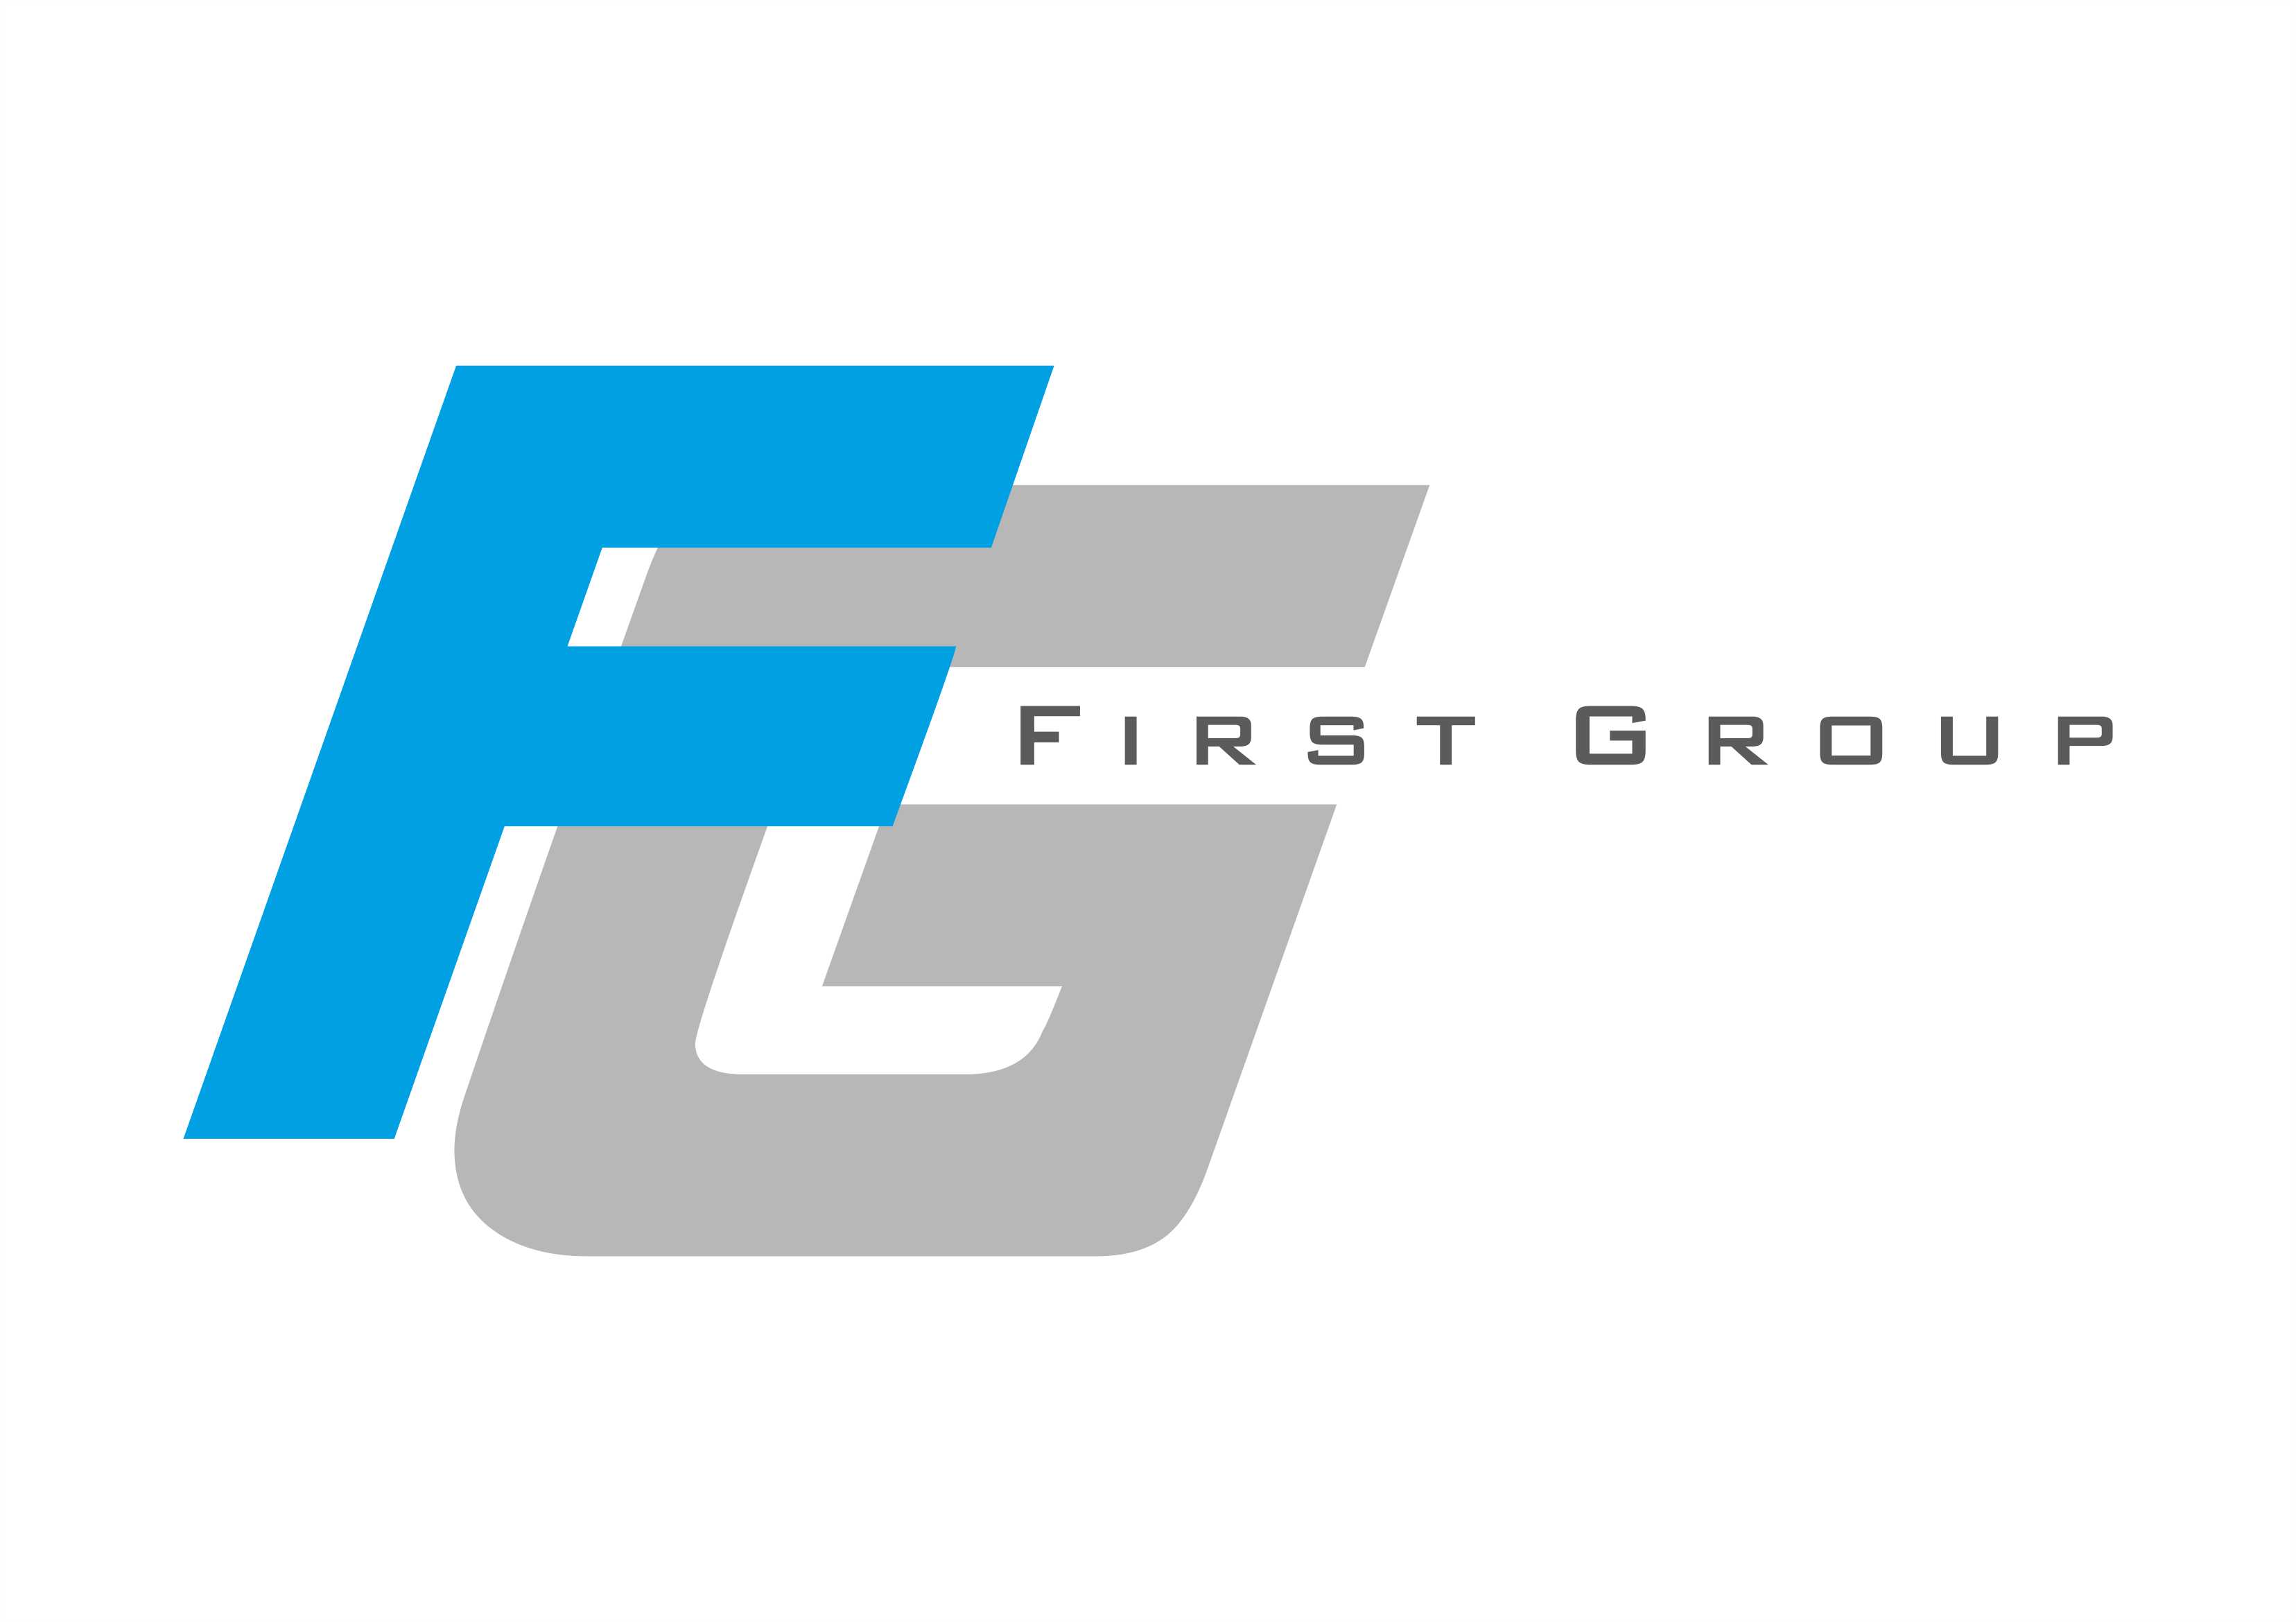 First фирма. Thefirstgroup. 01 Group. FC "FIRSTGROUP".